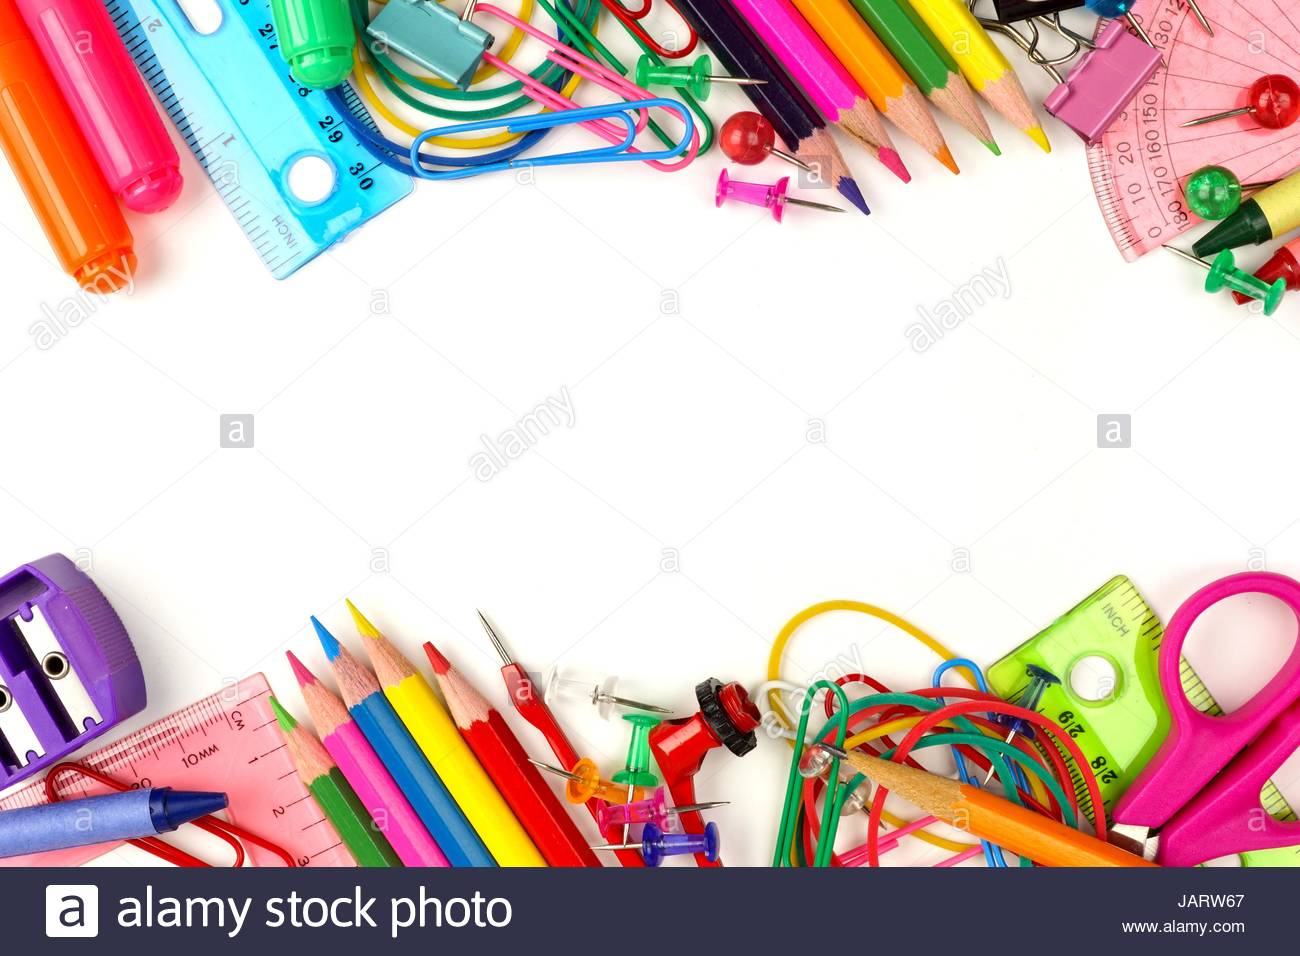 Double Border Of Colorful School Supplies On A White Background